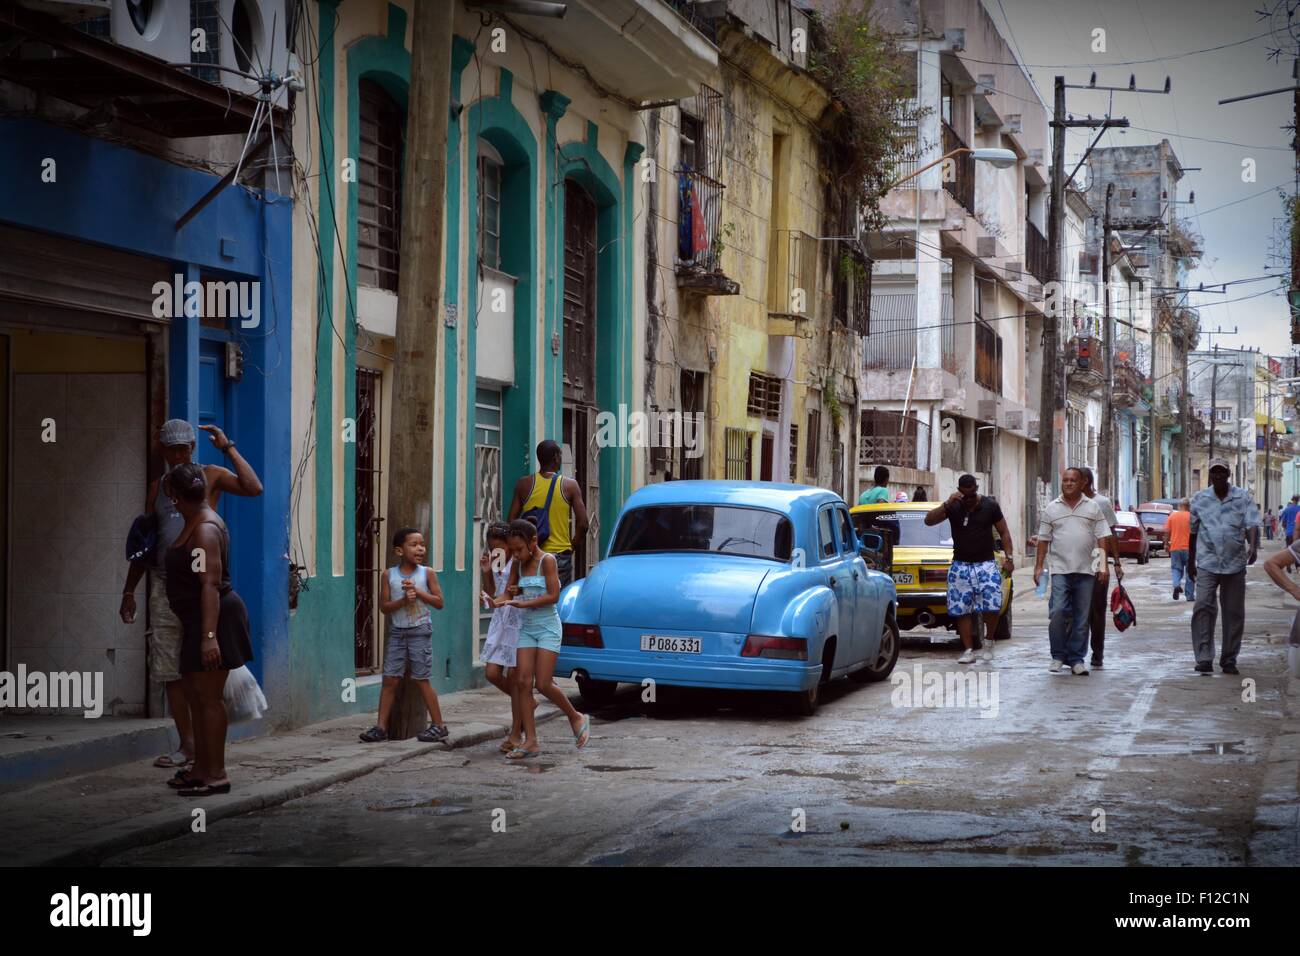 Residential street scene on the outskirts of town, after rainfall, Havana, Cuba. Stock Photo